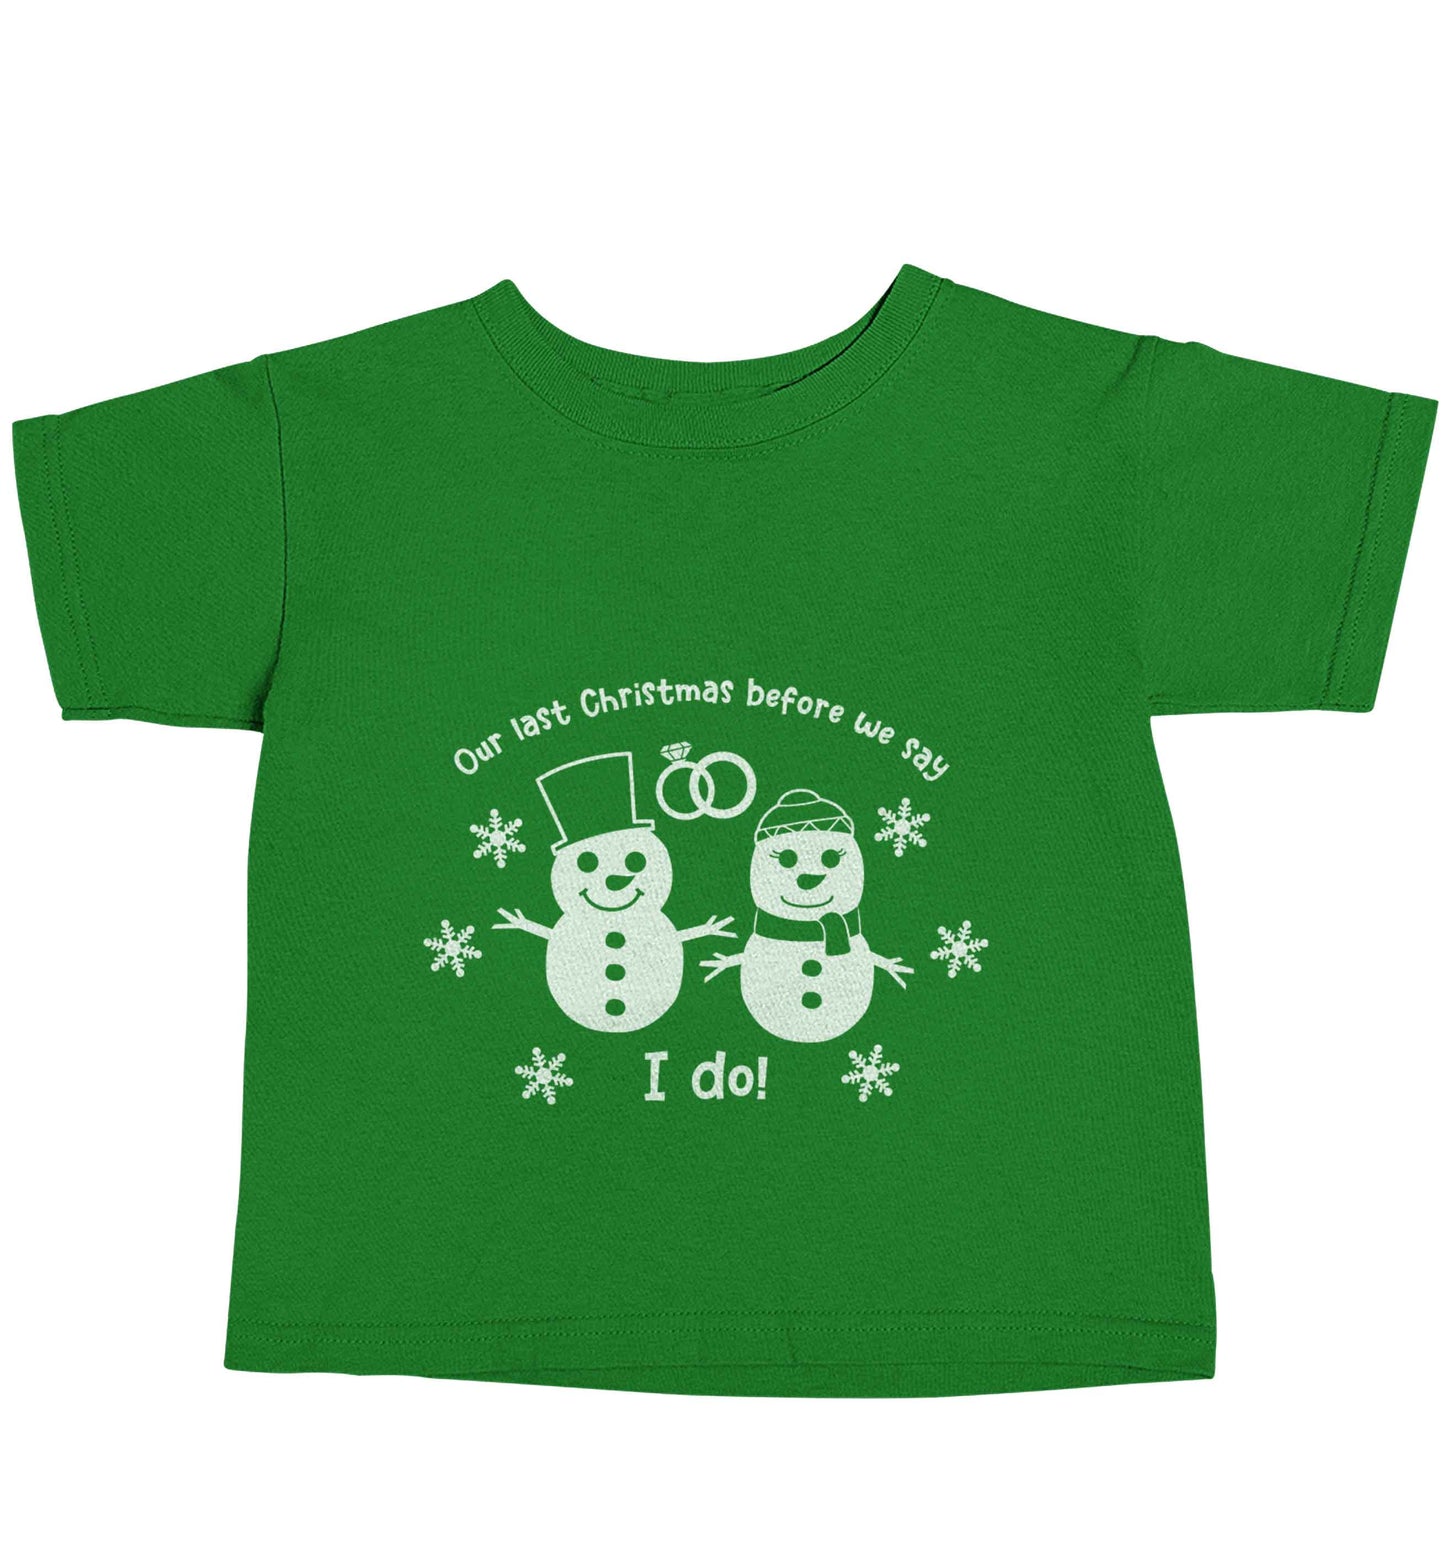 Last Christmas before we say I do green baby toddler Tshirt 2 Years